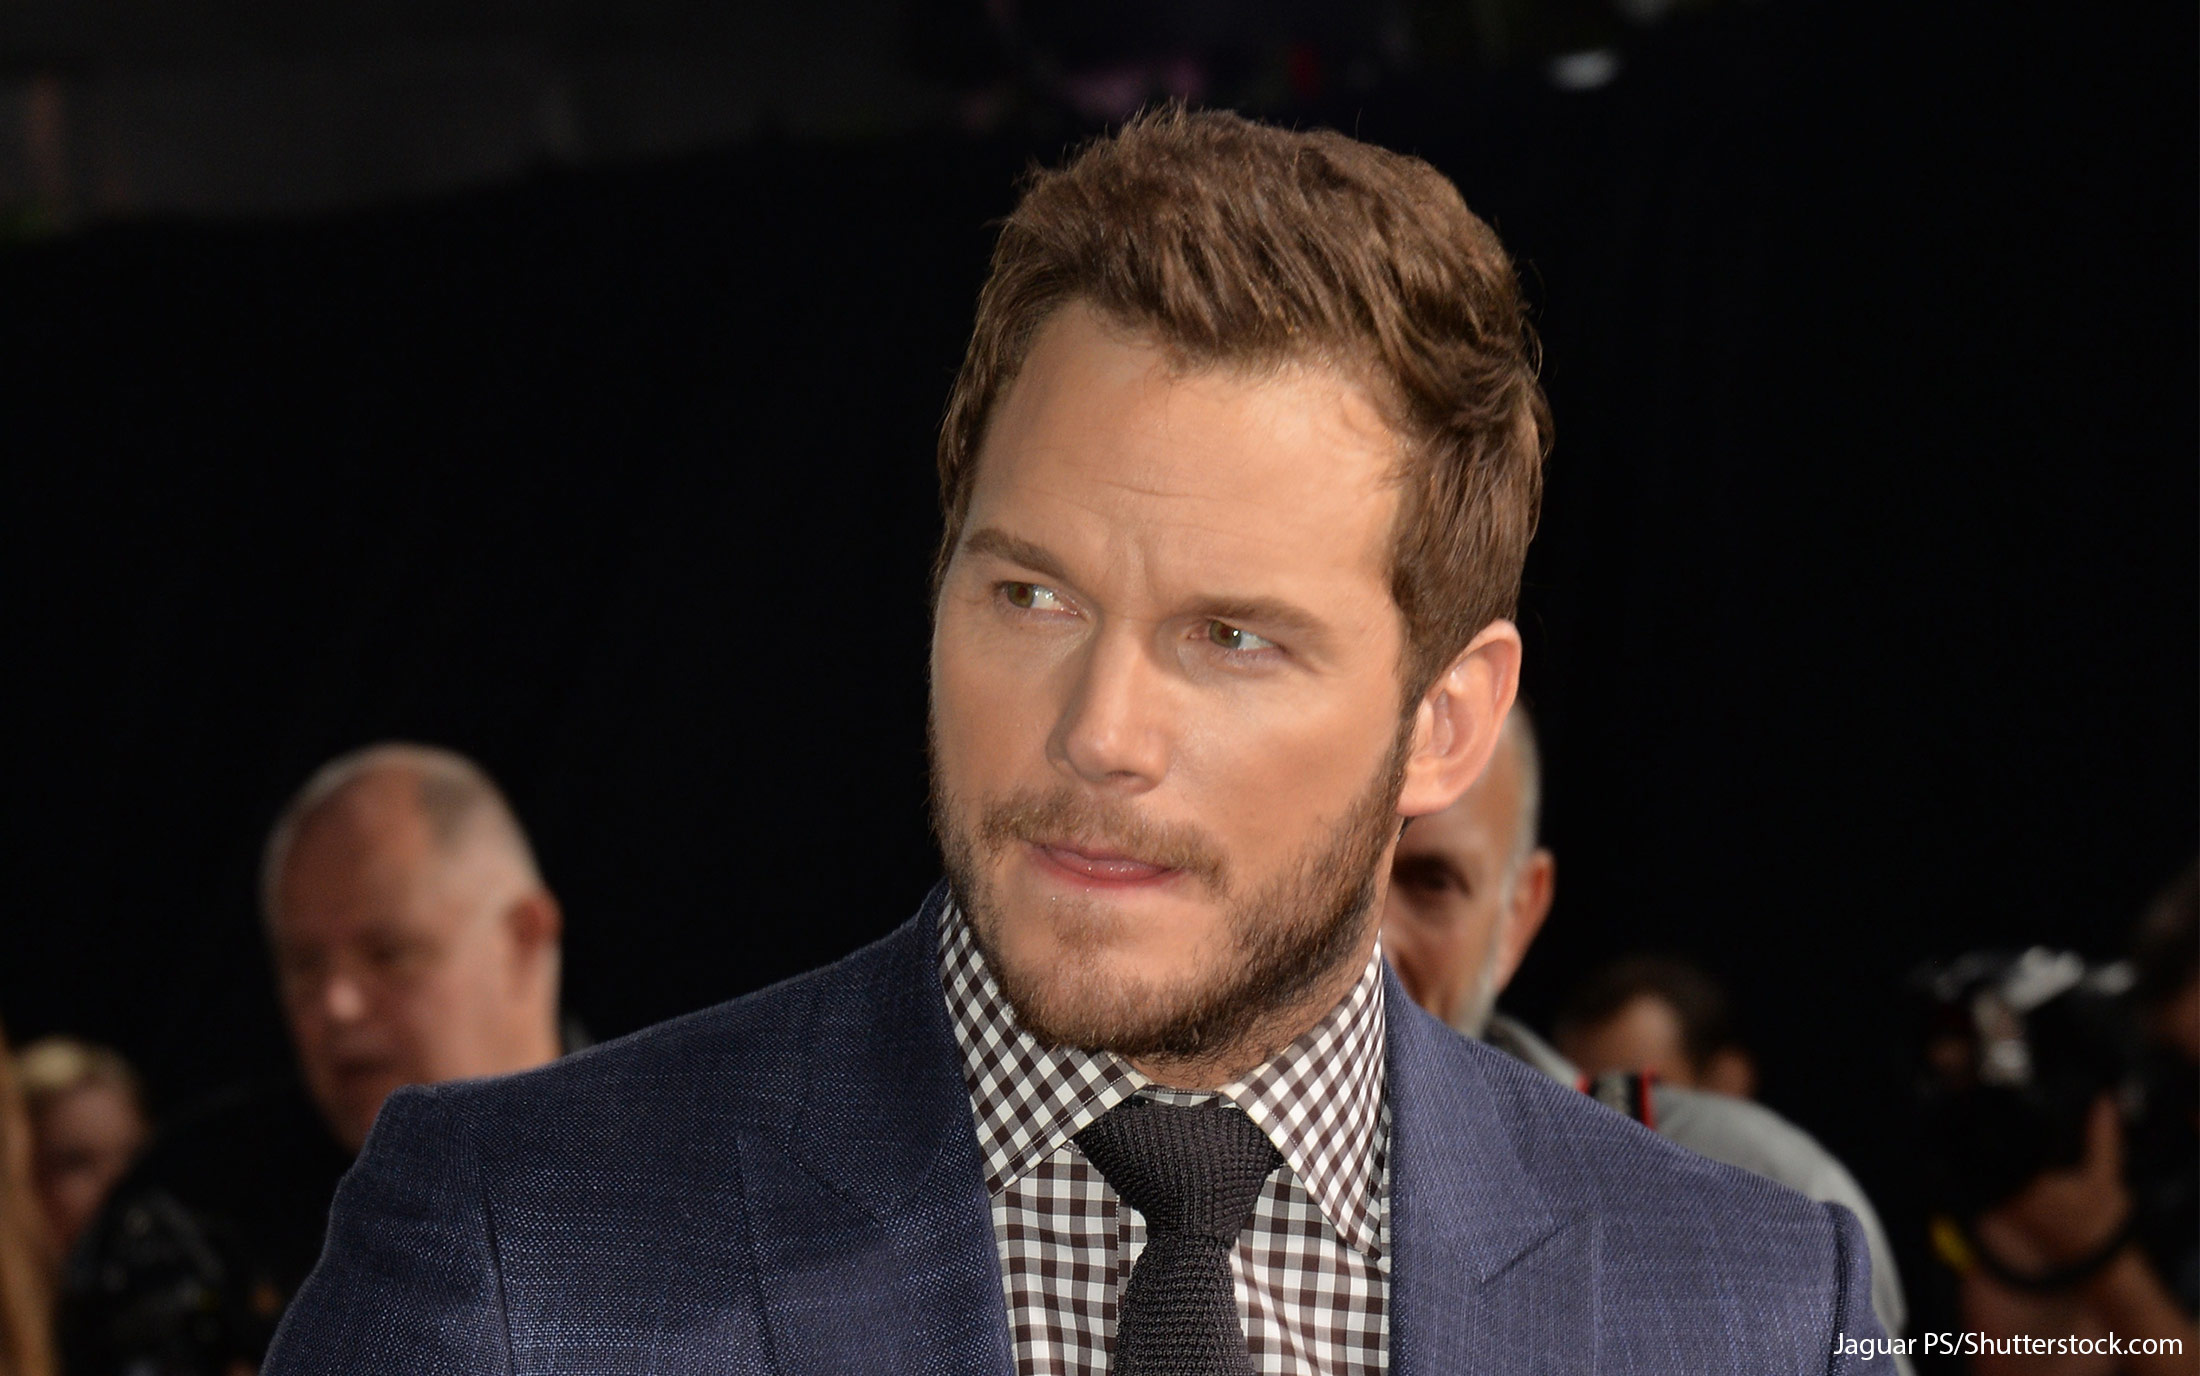 Chris Pratt's Net Worth: 'Guardians of the Galaxy 2' and 'Parks and - How Much Is Chris Pratt Worth